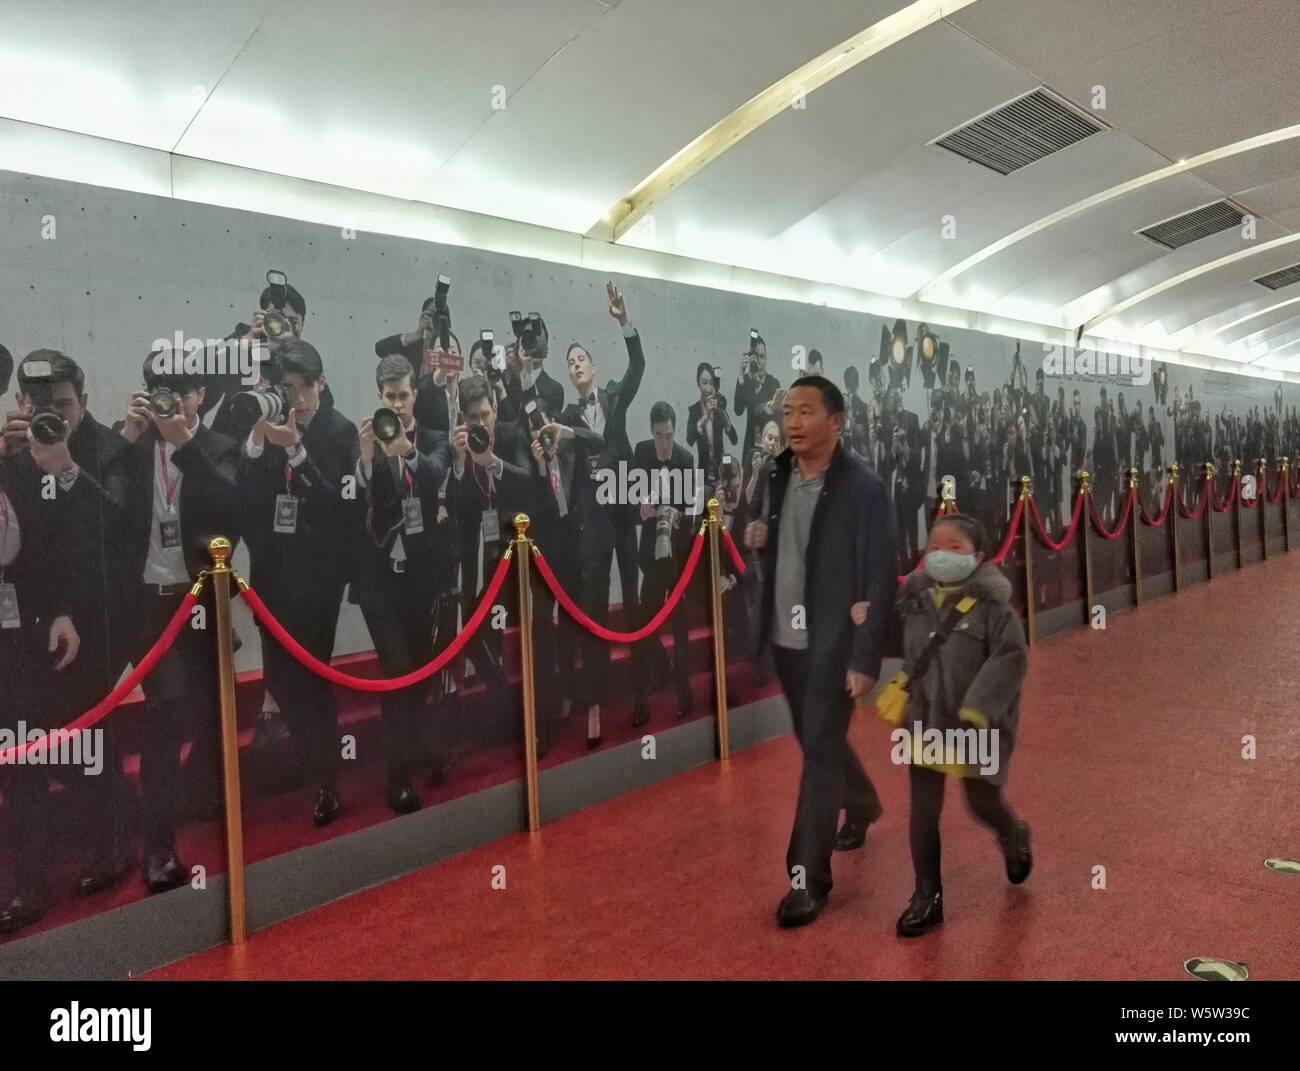 Passengers walk past a 60-meter-long mural of paparazzi at a red carpet event made by Chinese personalized news app Toutiao.com of Bytedance Ltd. at t Stock Photo